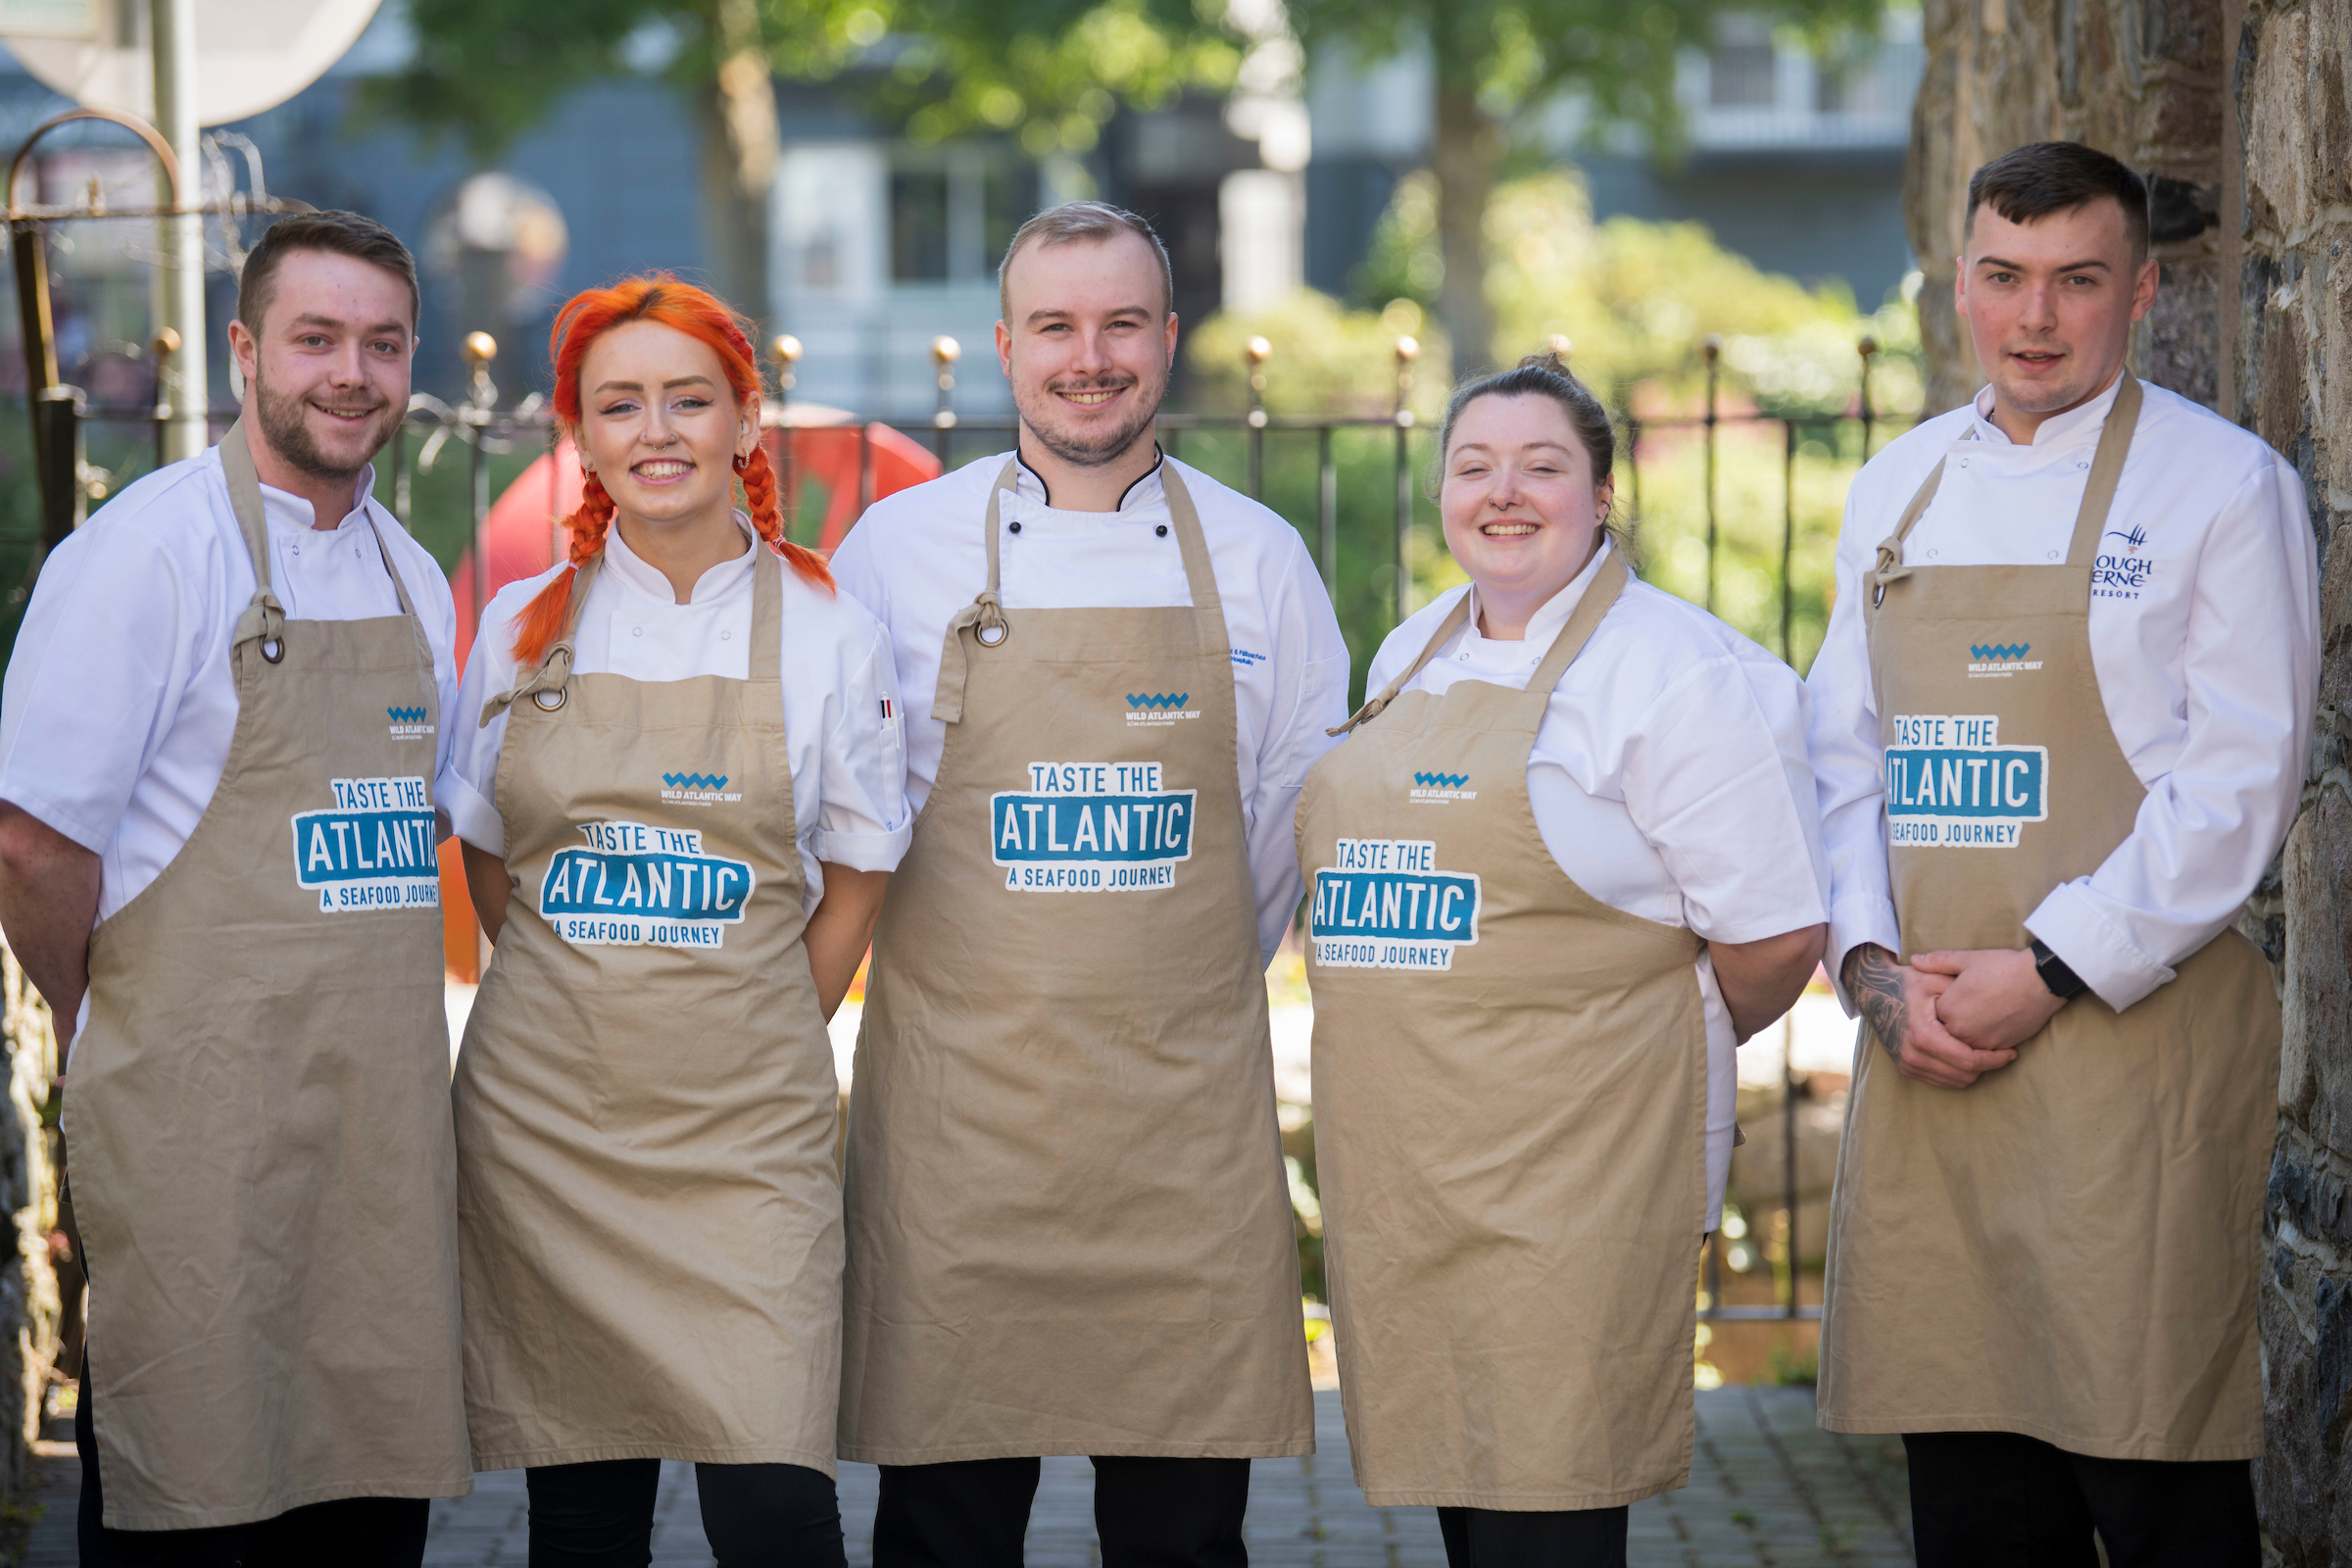 BIM’s Taste the Atlantic Young Chef Ambassador Programme is now open for applications